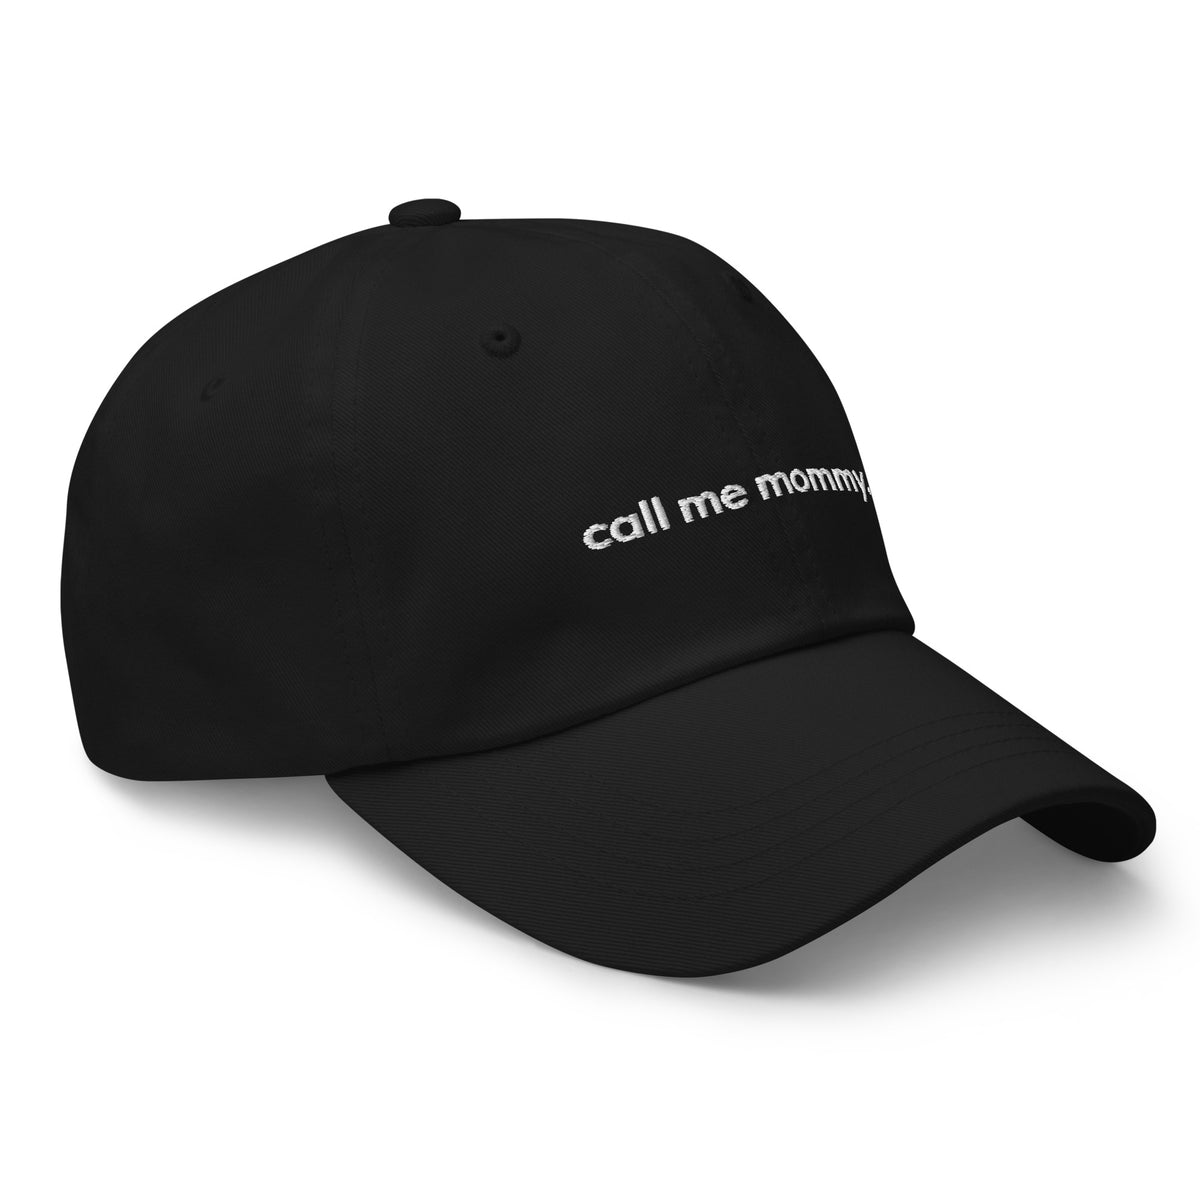 Casquette | Call Me Mommy Coeur Tendre